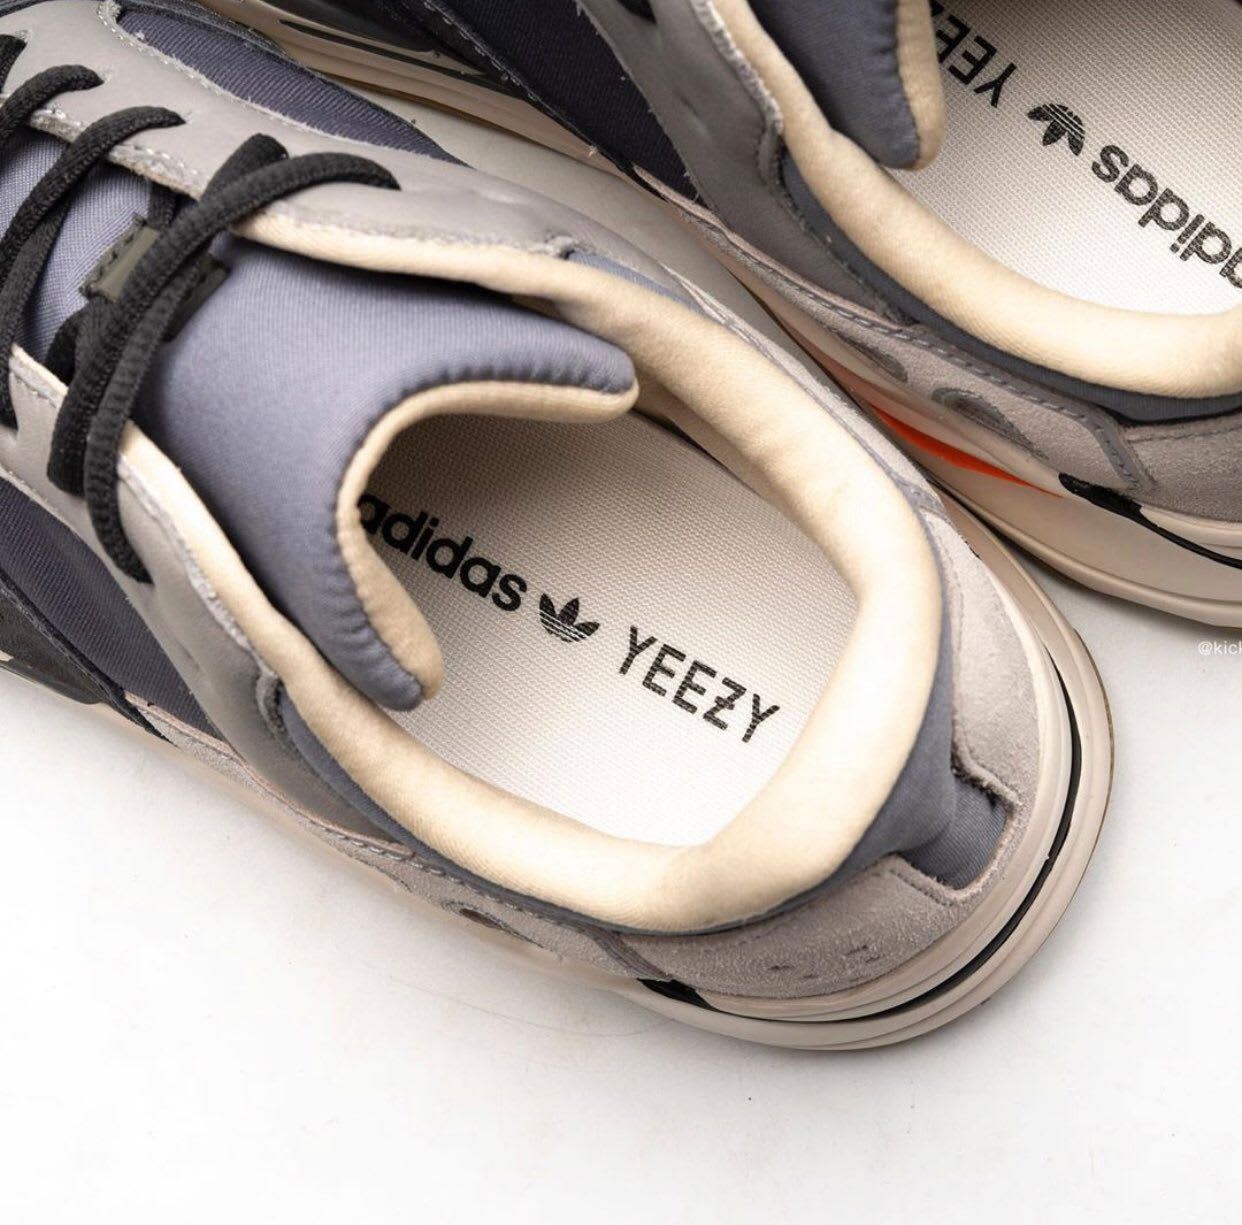 Adidas Yeezy Boost 700 'Magnet' (Insole)